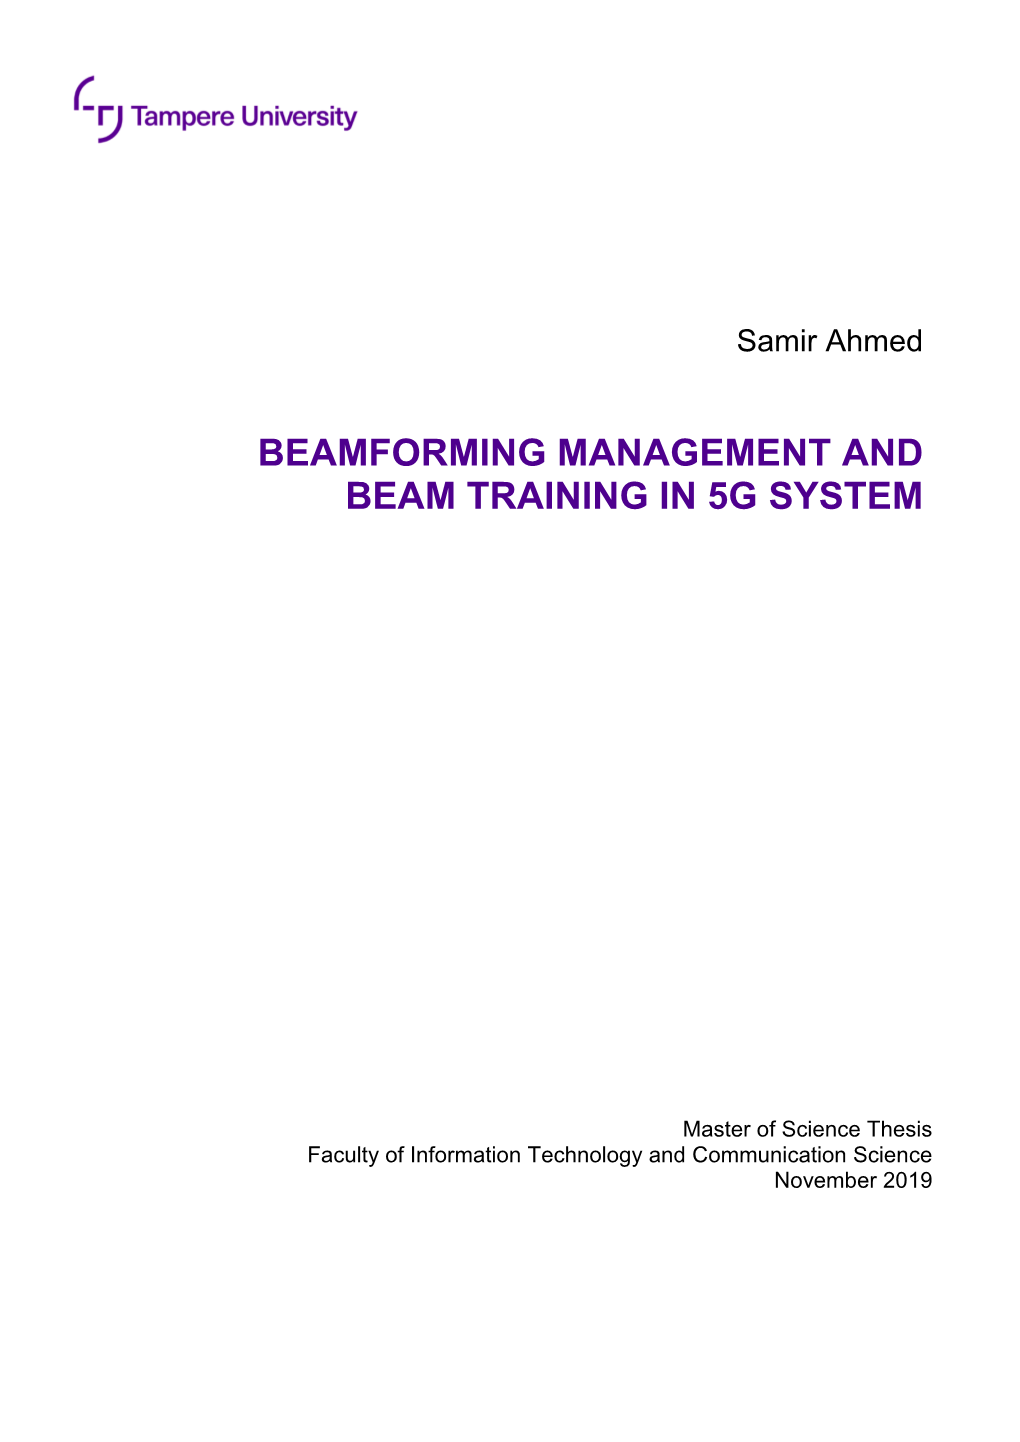 Beamforming Management and Beam Training in 5G System